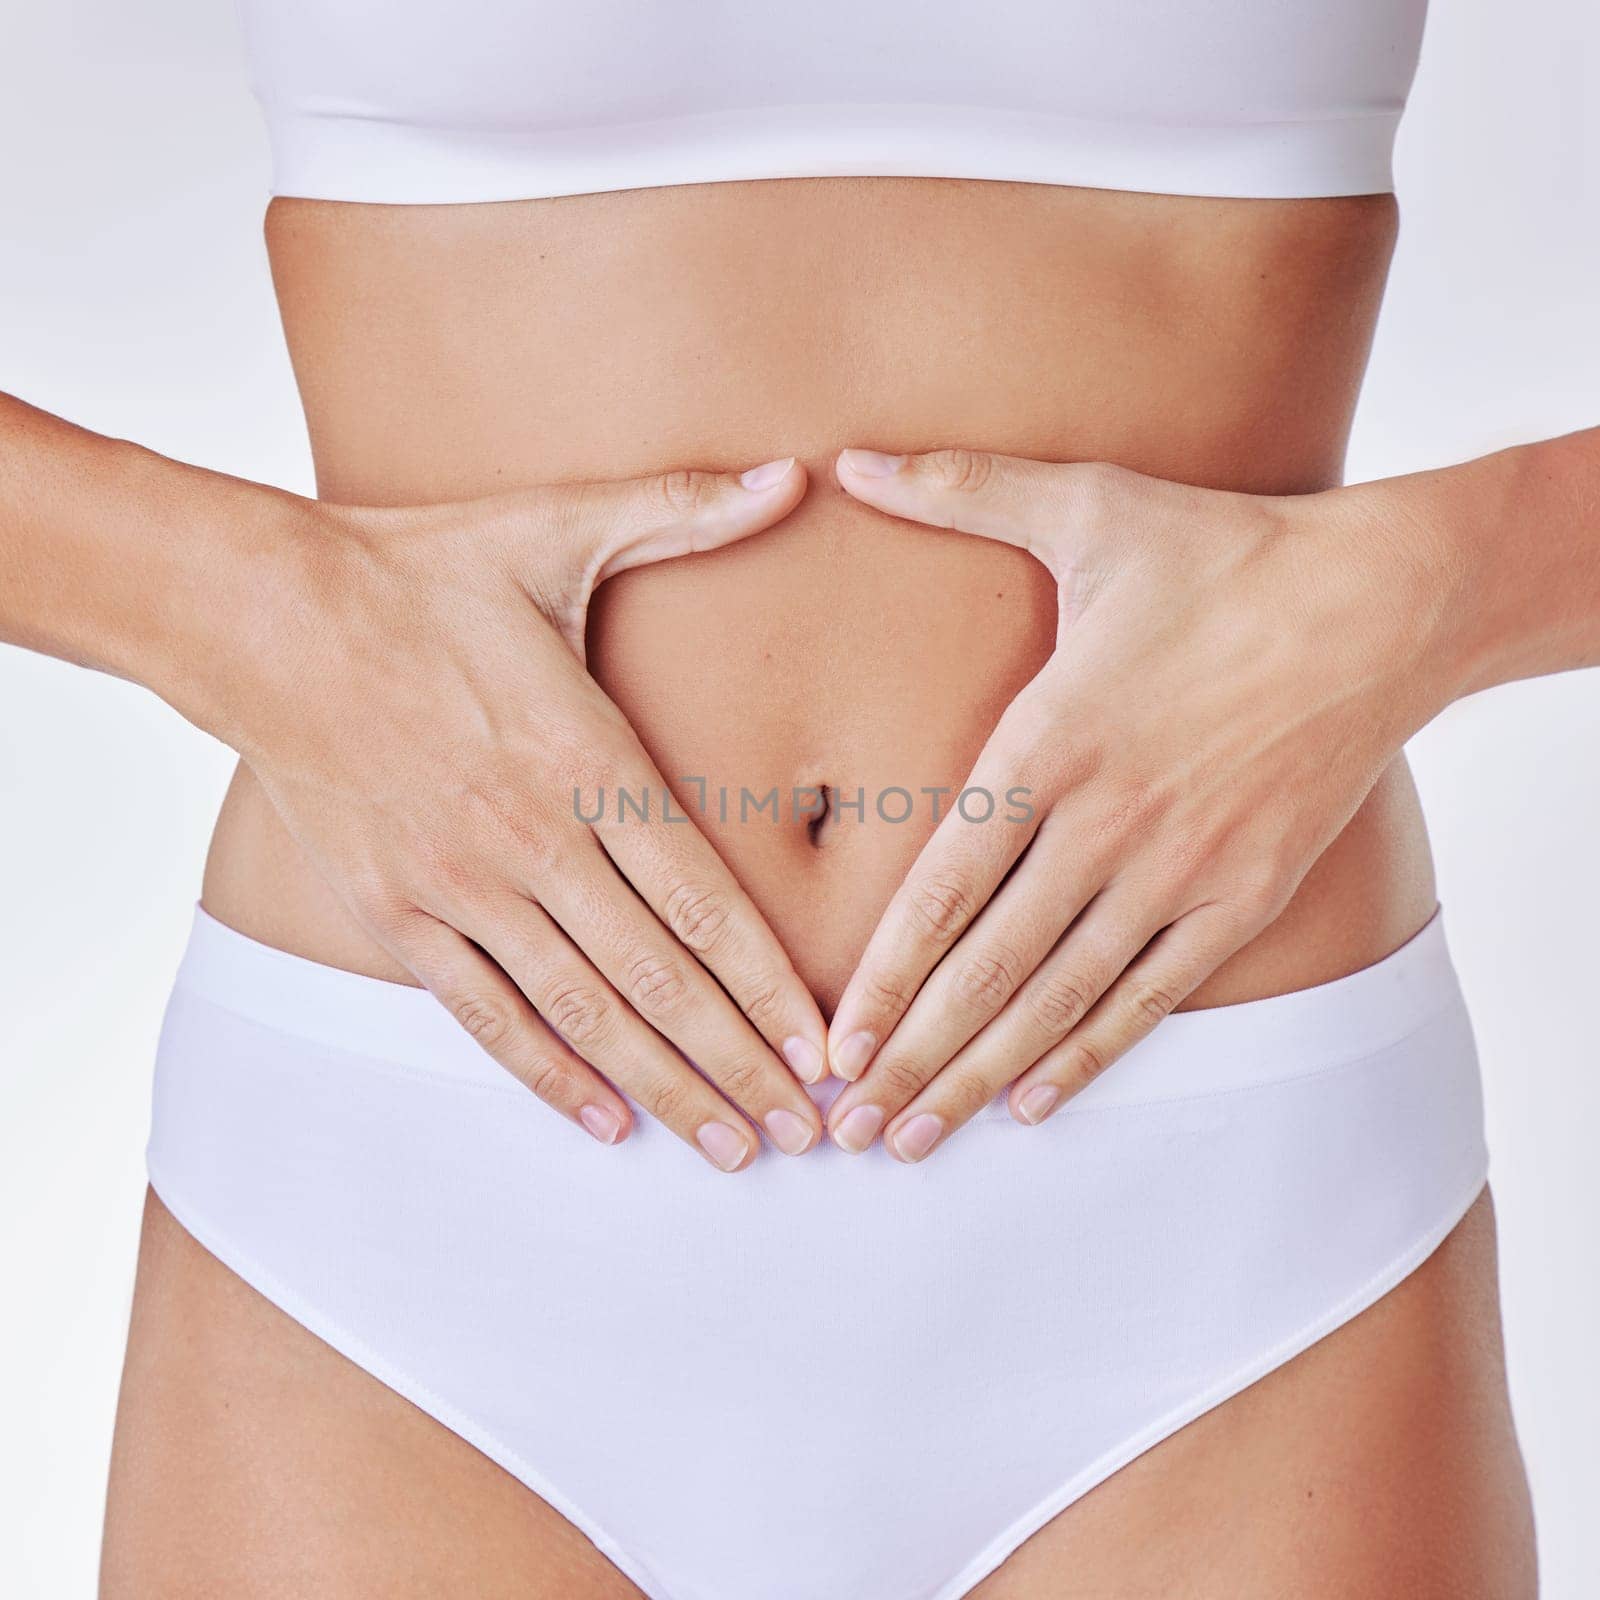 Hands heart, stomach and woman in studio showing gut health, wellness and weight loss. Digestion, female person and hand by abdomen with sign for healthy body care and fitness with white background.